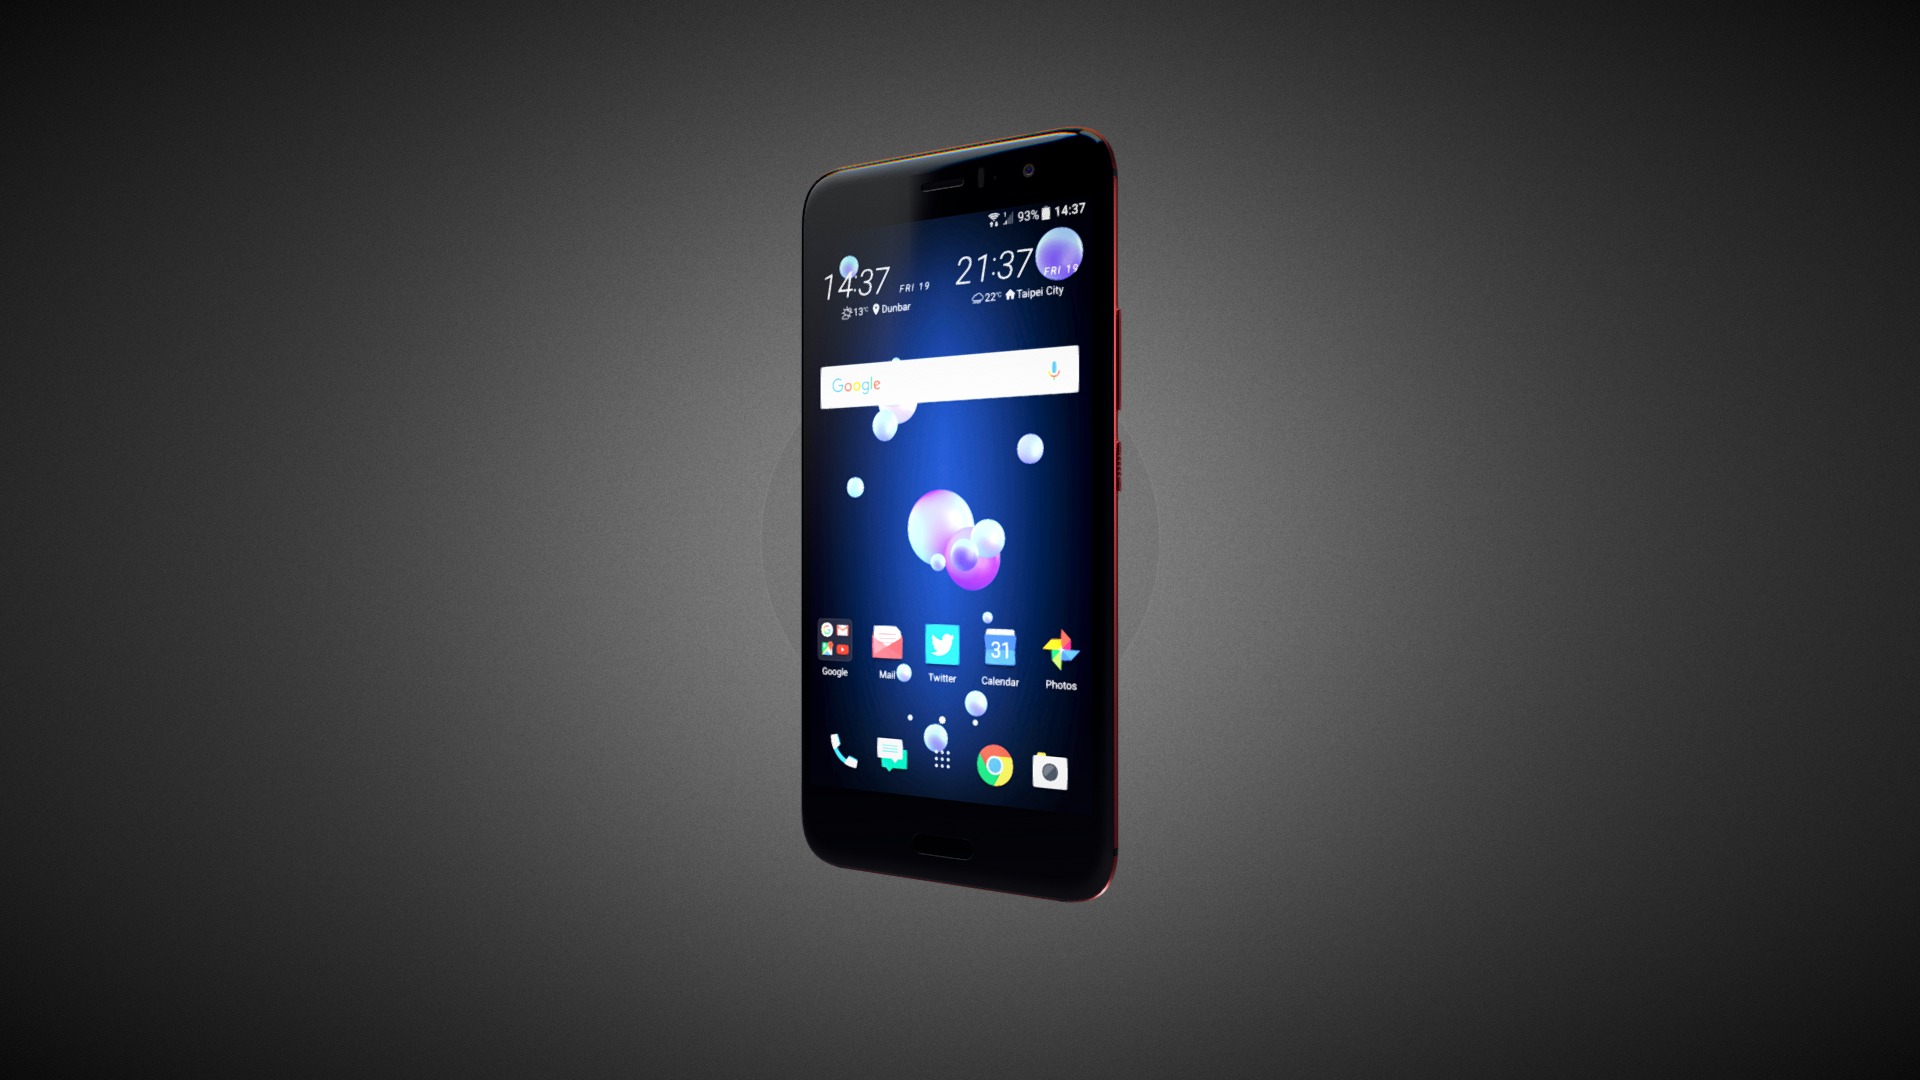 3D model HTC U11 for Element 3D - This is a 3D model of the HTC U11 for Element 3D. The 3D model is about a black rectangular device with a screen.